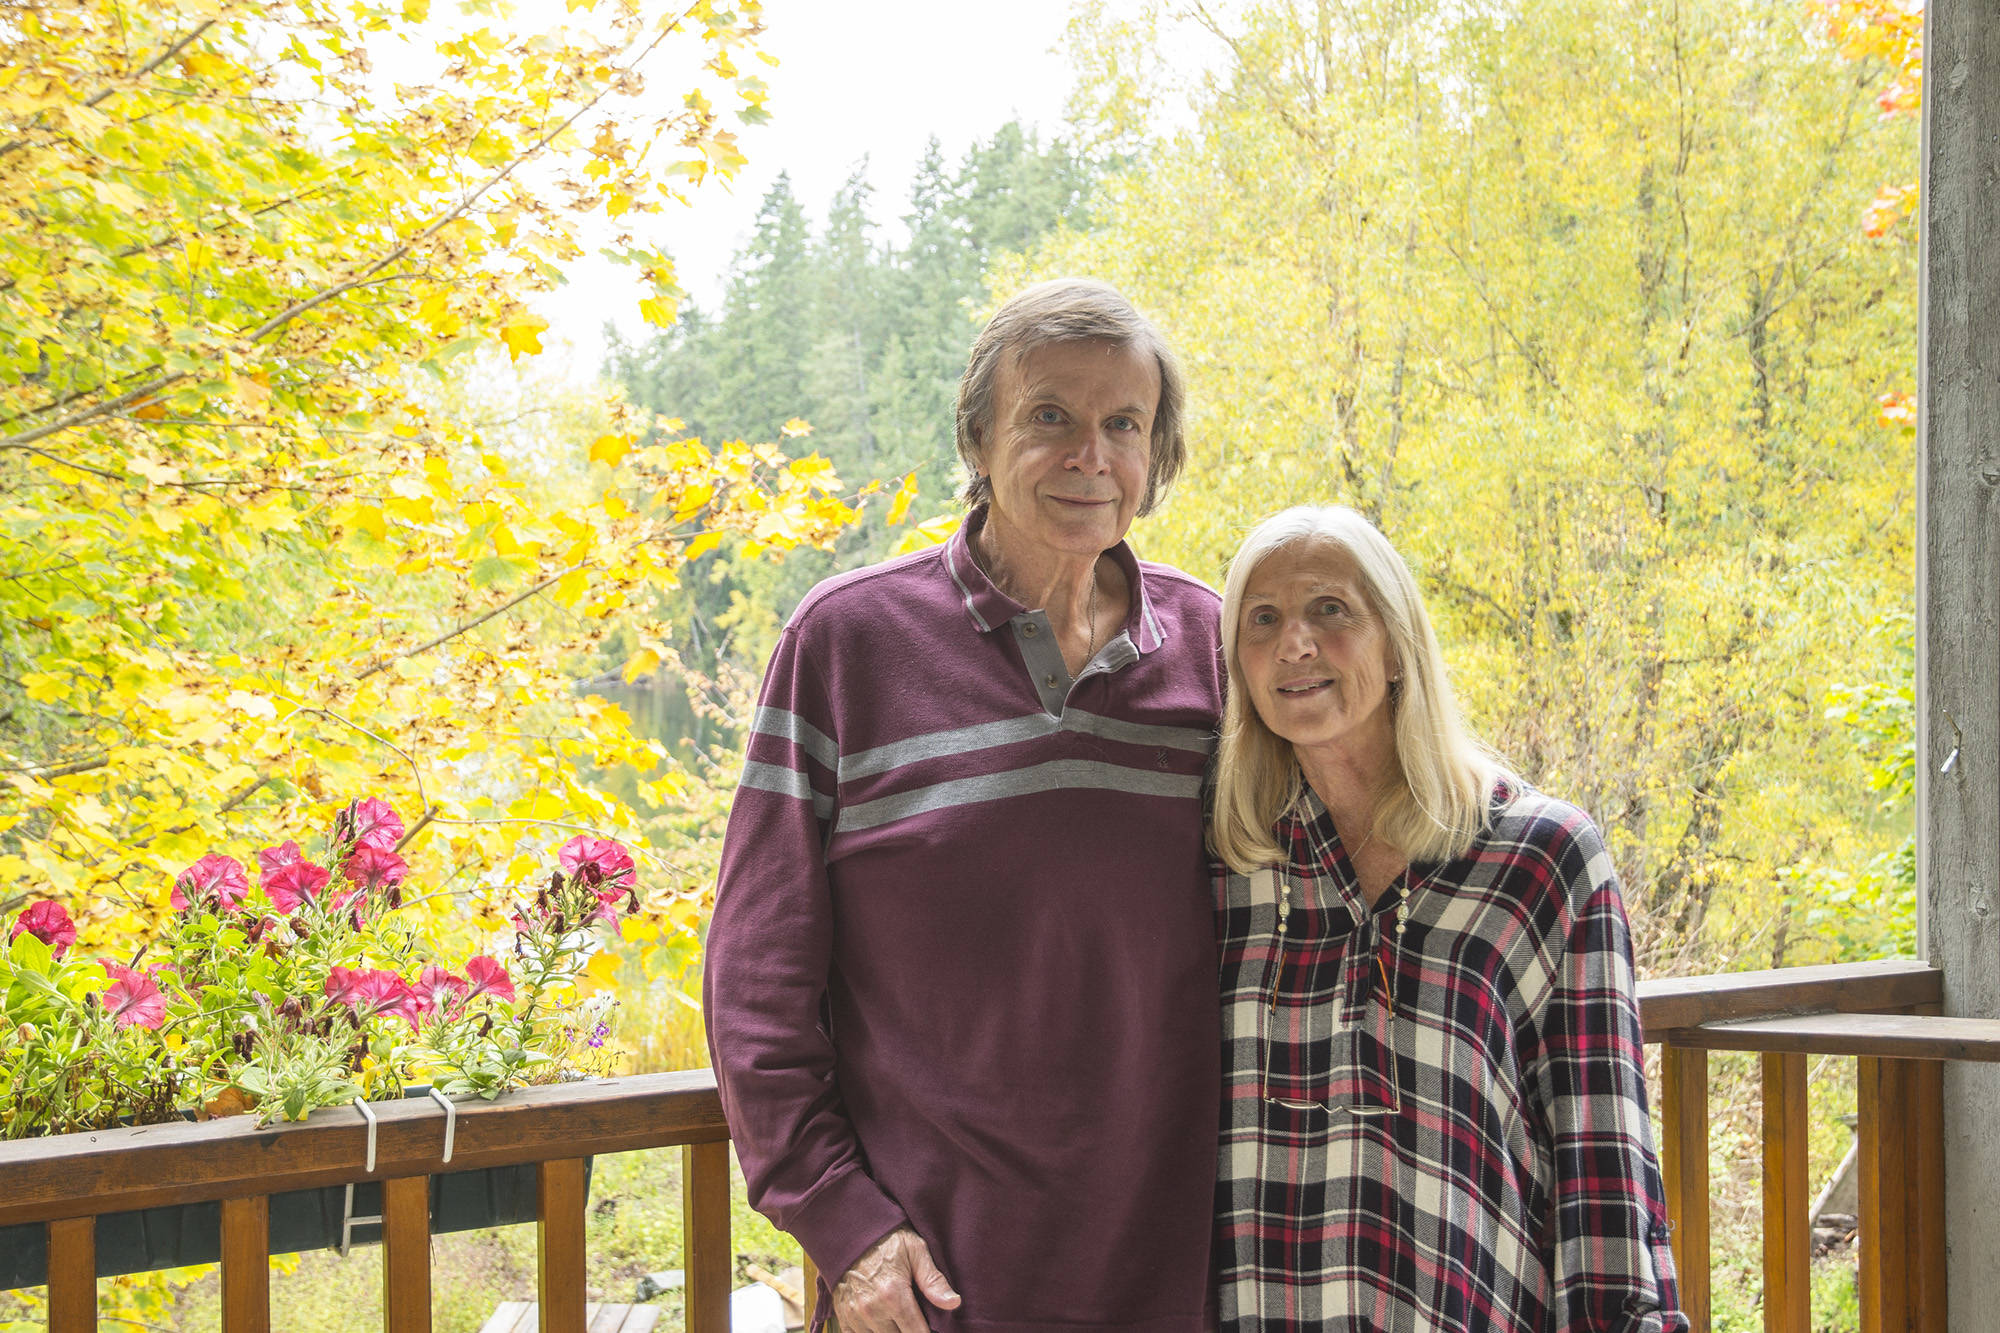 Clive Callaway and Cathryn Rankin who rent a secondary suite at their Gardom Lake home hope that a frustrating experience they had with tenants during the early days of the COVID-19 pandemic can lead to changes to regulations around rental units. (Jim Elliot-Salmon Arm Obsever)